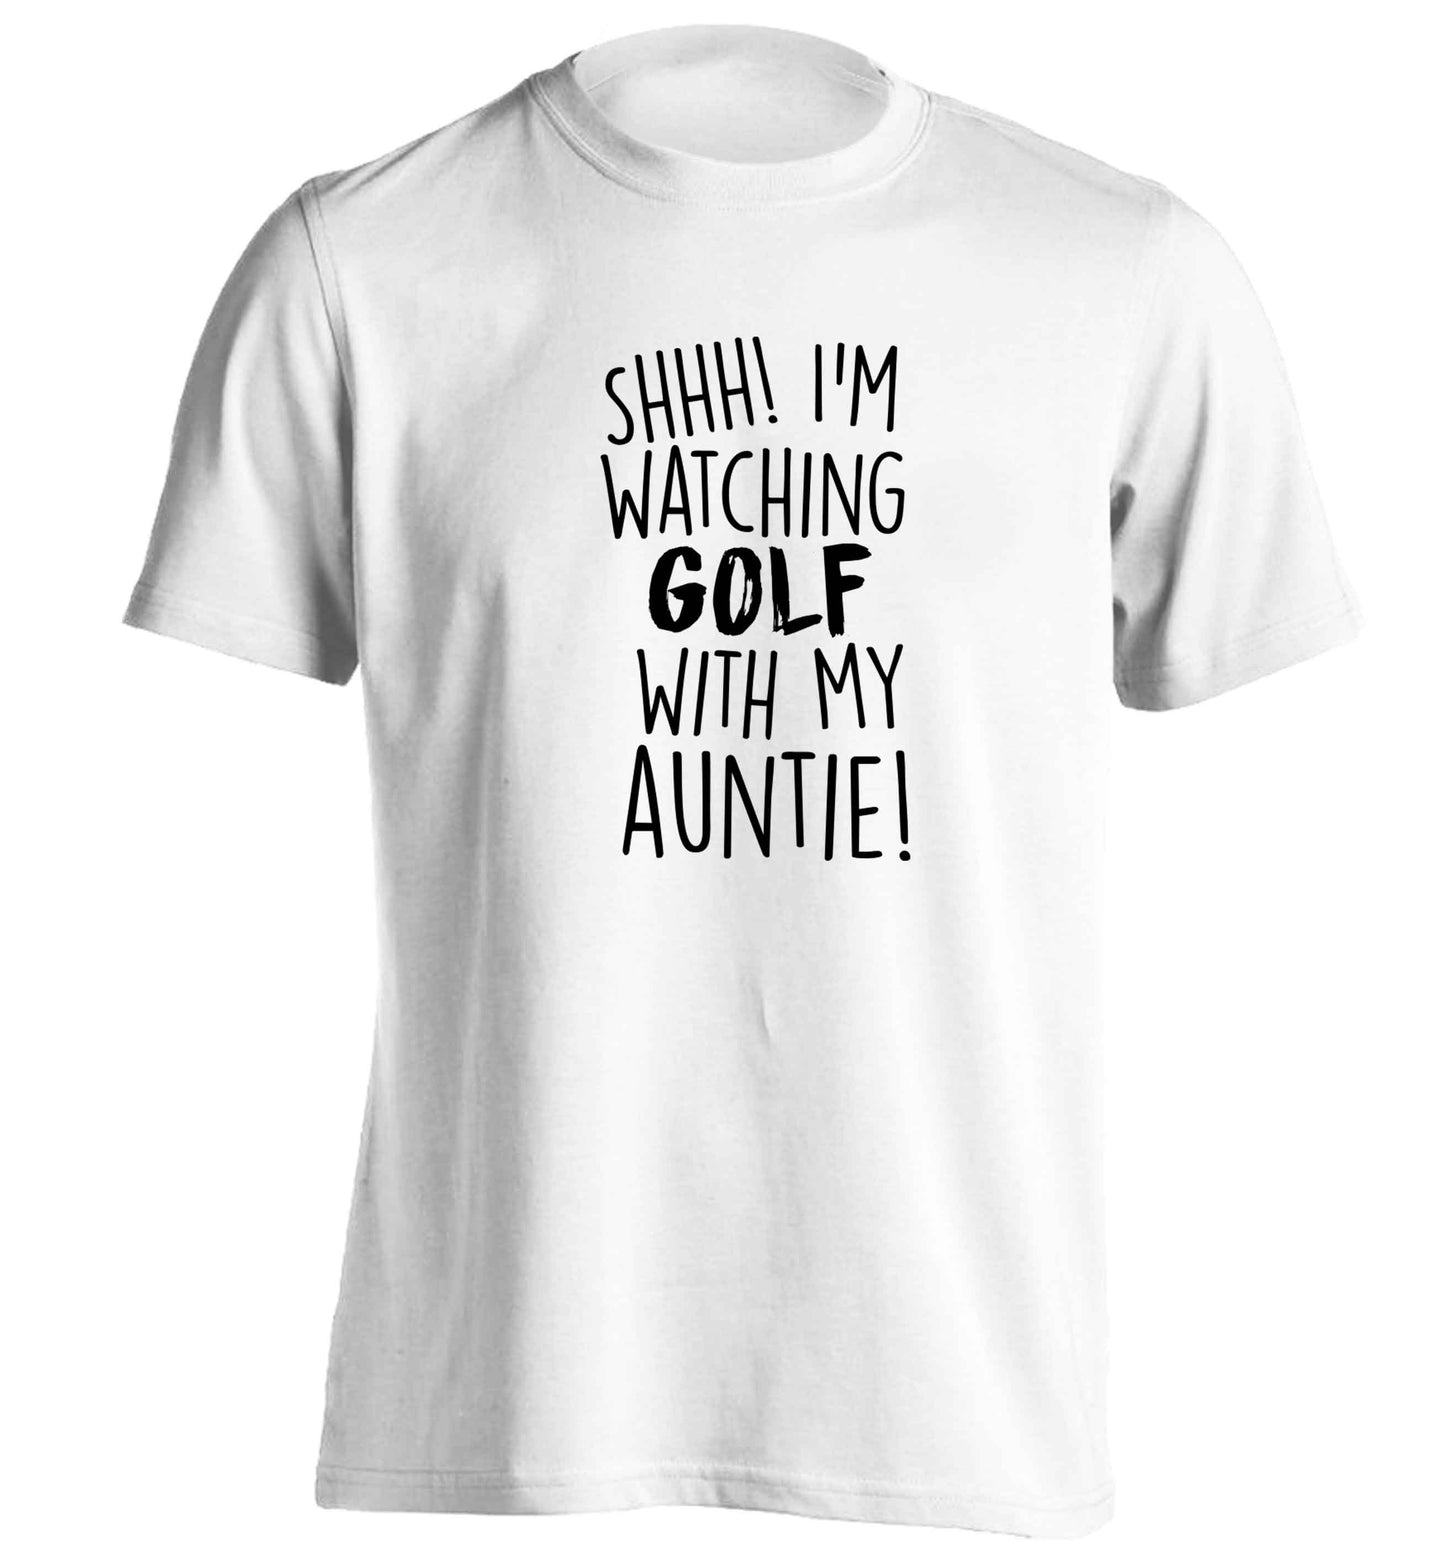 Shh I'm watching golf with my auntie adults unisex white Tshirt 2XL